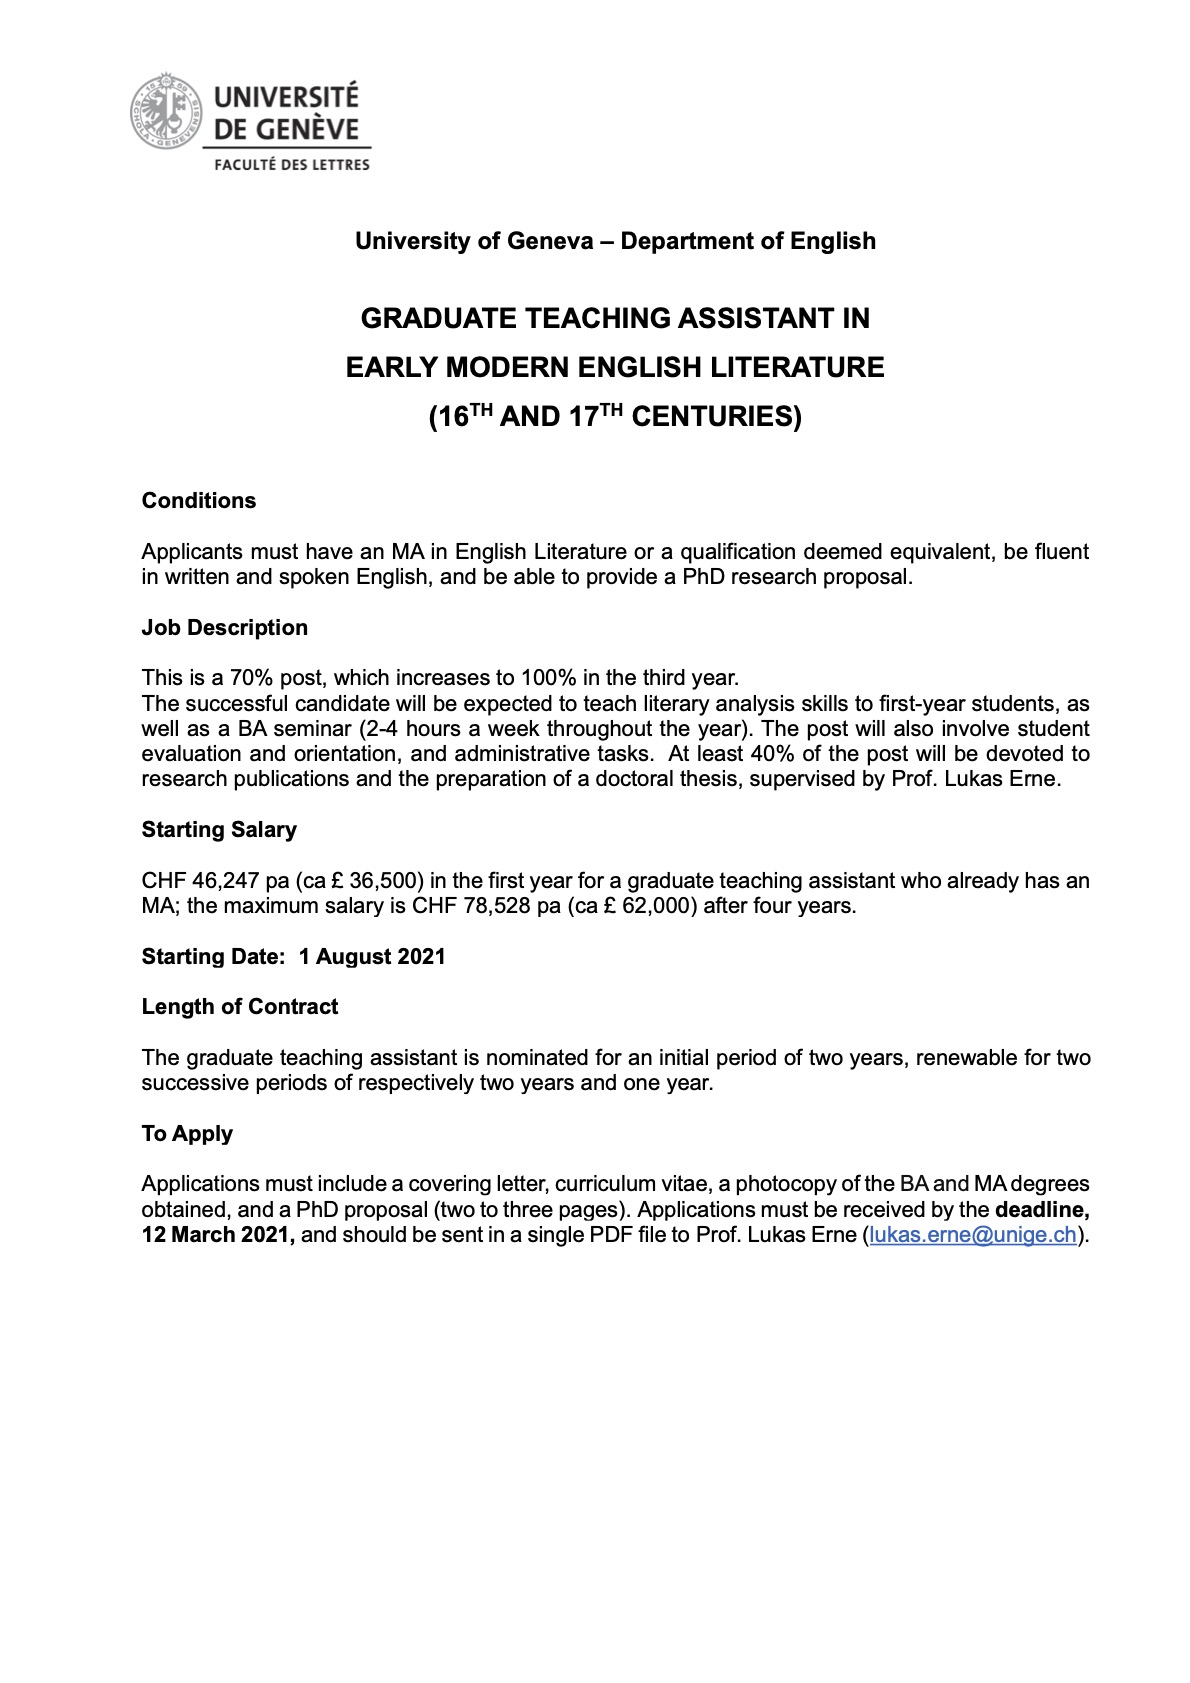 Vacant Position - GRADUATE TEACHING ASSISTANT IN EARLY MODERN ENGLISH LITERATURE (16TH AND 17TH CENTURIES) University of Geneva